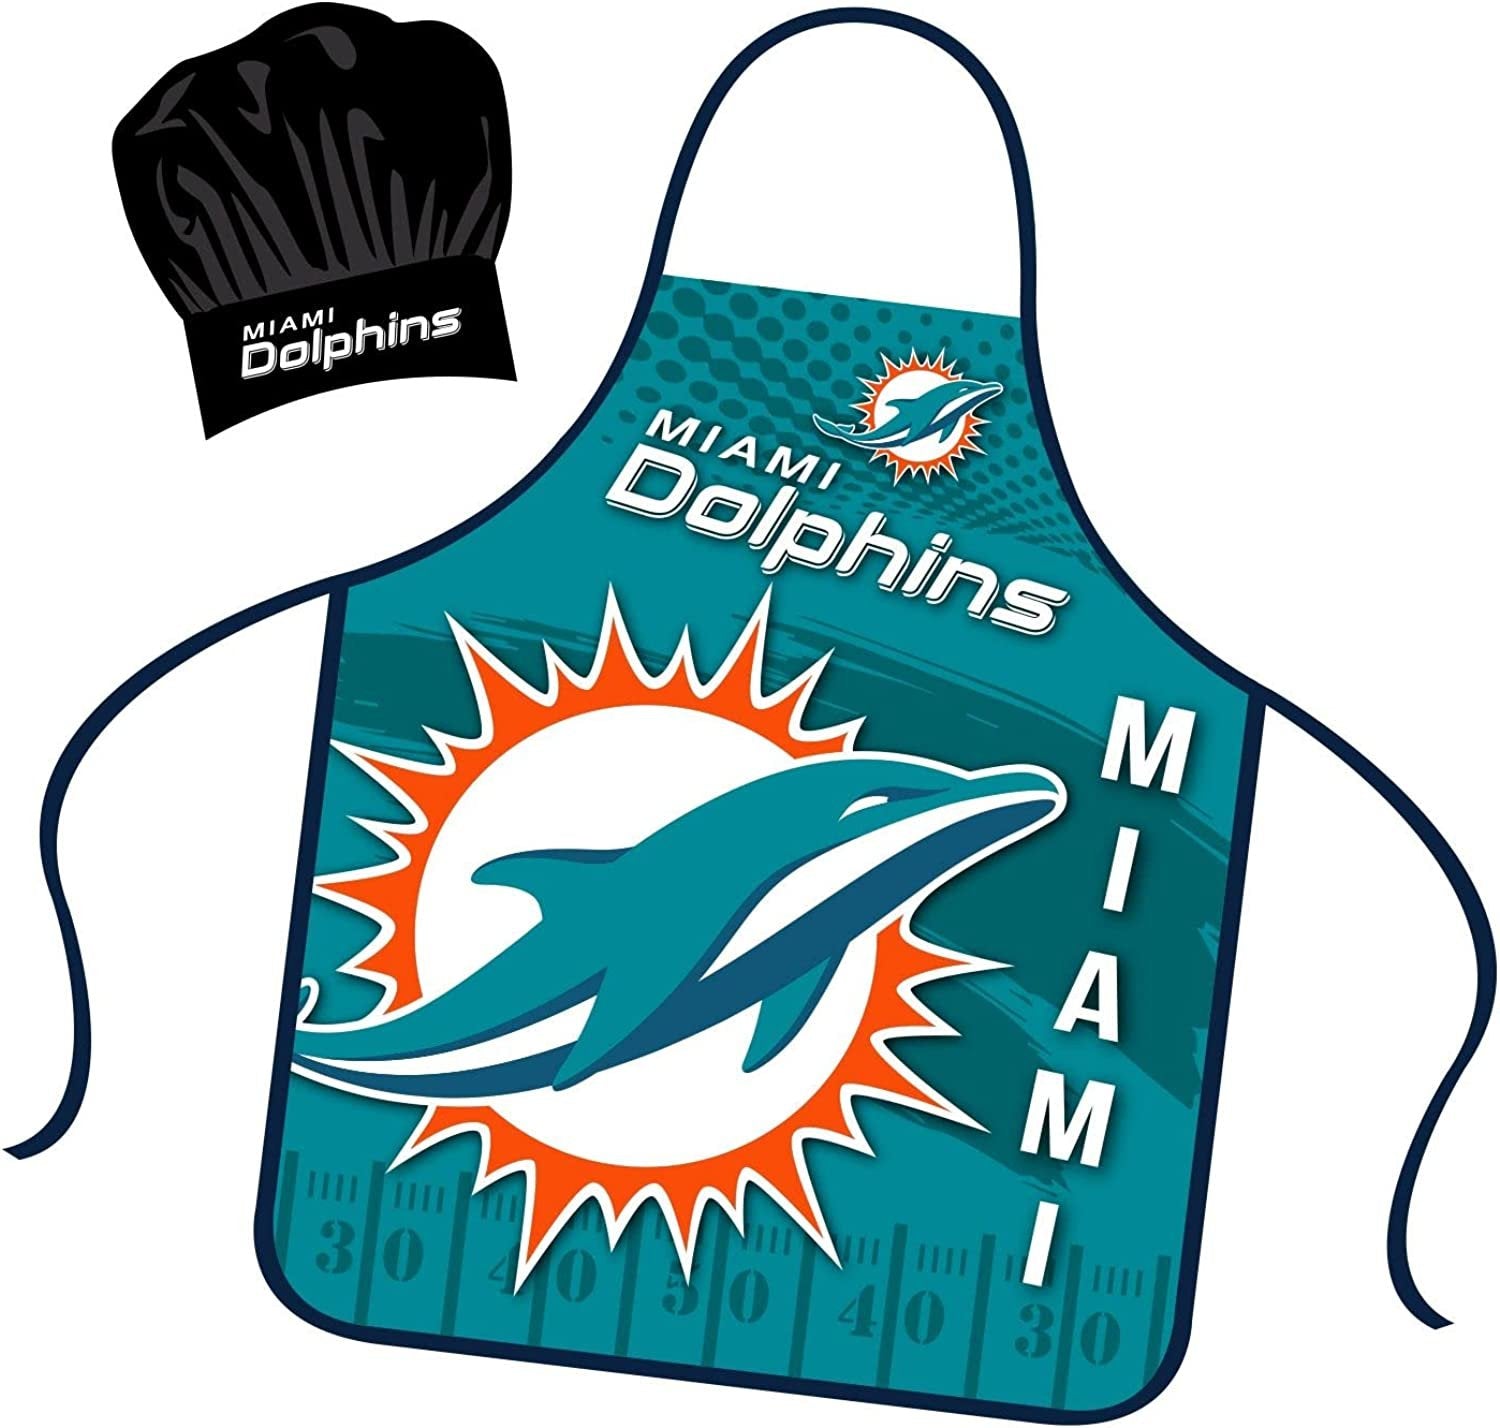 Miami Dolphins Apron Chef Hat Set Full Color Universal Size Tie Back Grilling Tailgate BBQ Cooking Host